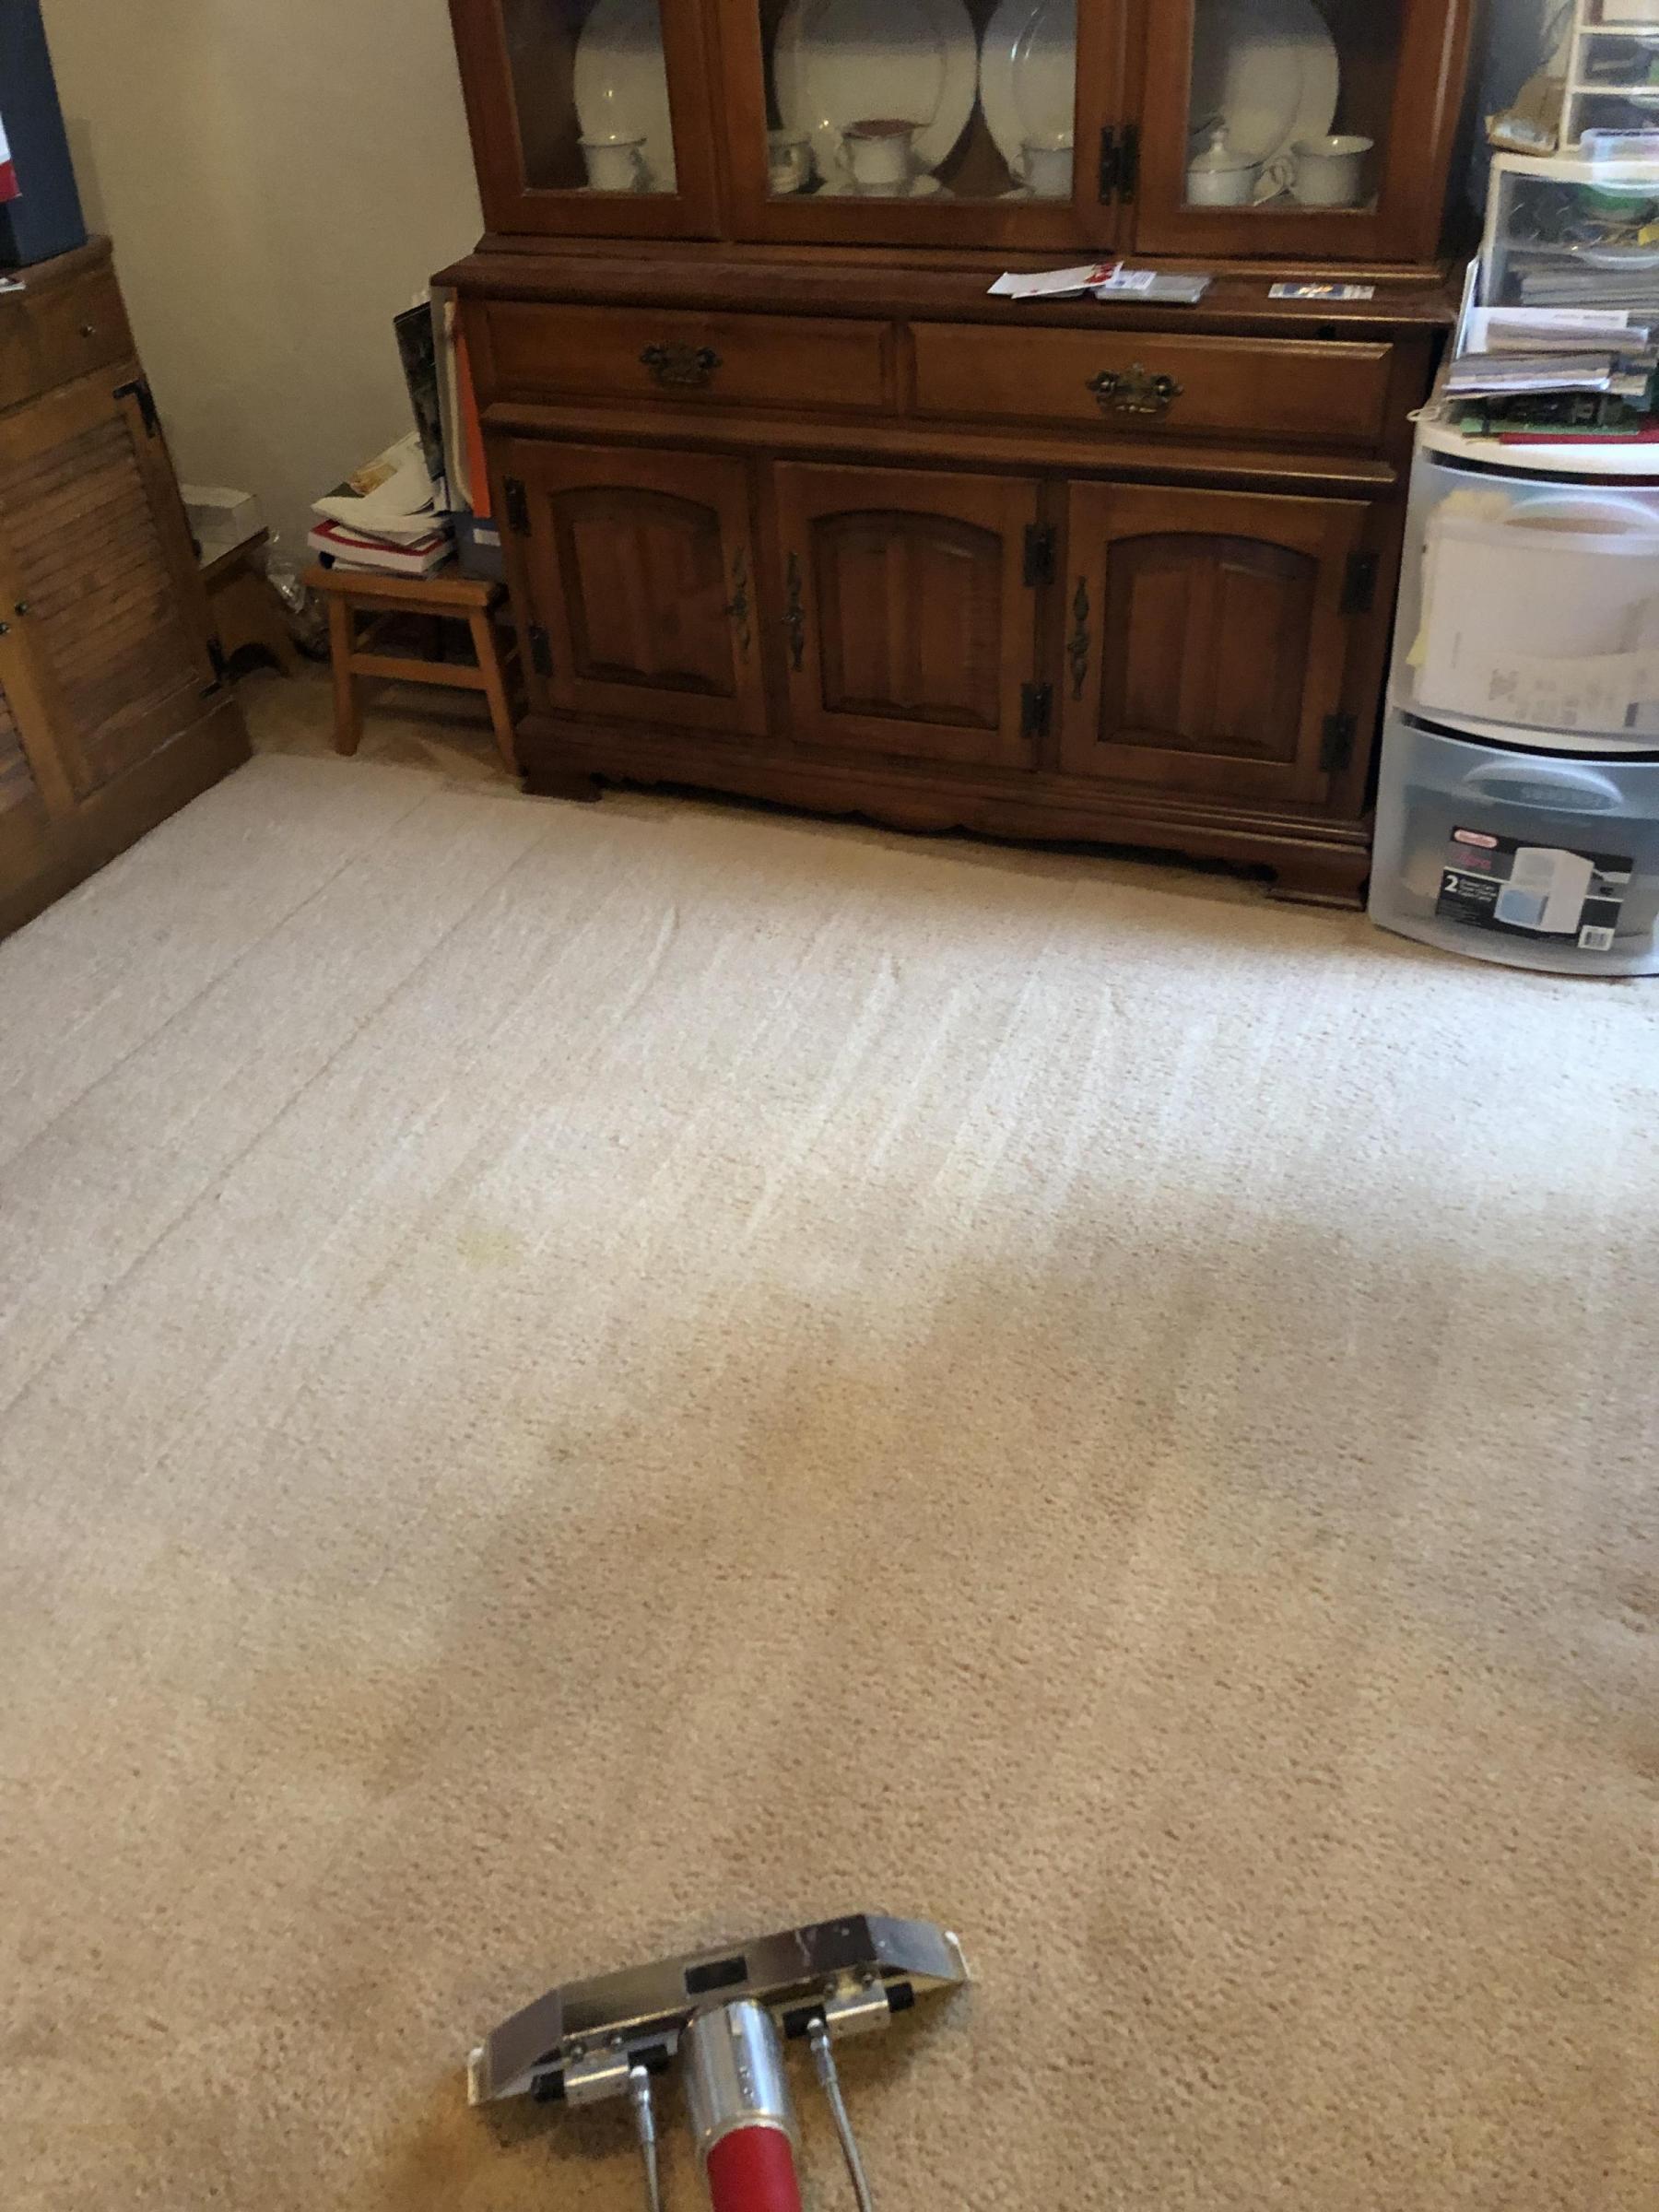 Prescott Valley: Where to Look for Reliable Carpet Cleaners